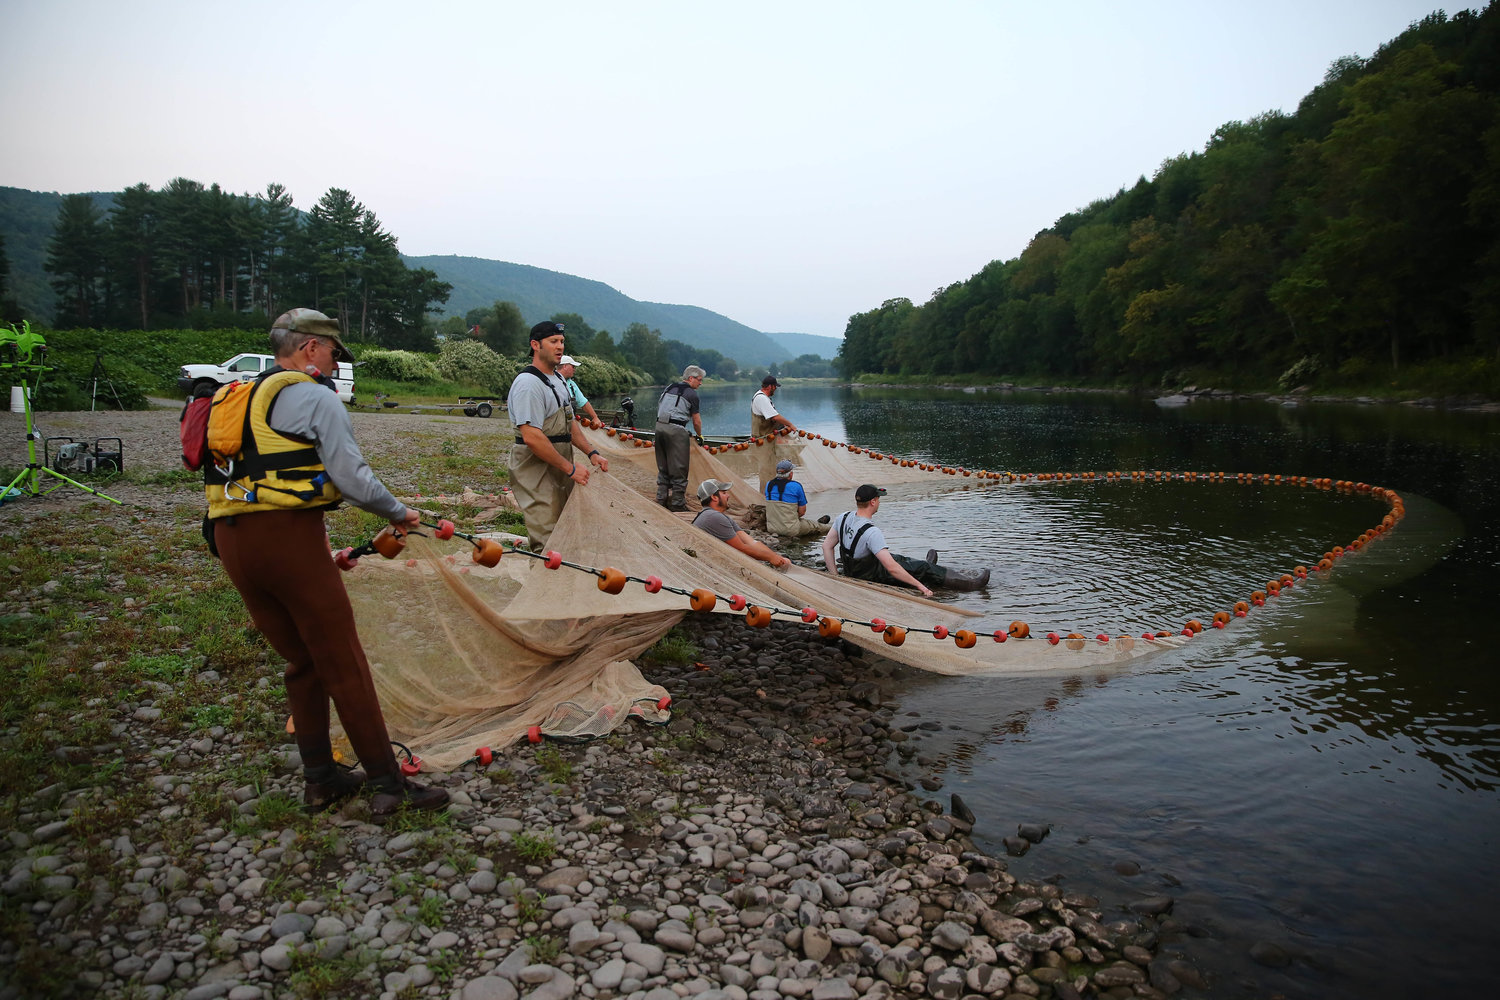 The National Park Service Resource Management Division and volunteers used a beach-seining method with nets measuring 300 feet long by 12 feet deep to collect samples of young-of-year American shad in the Upper Delaware River.